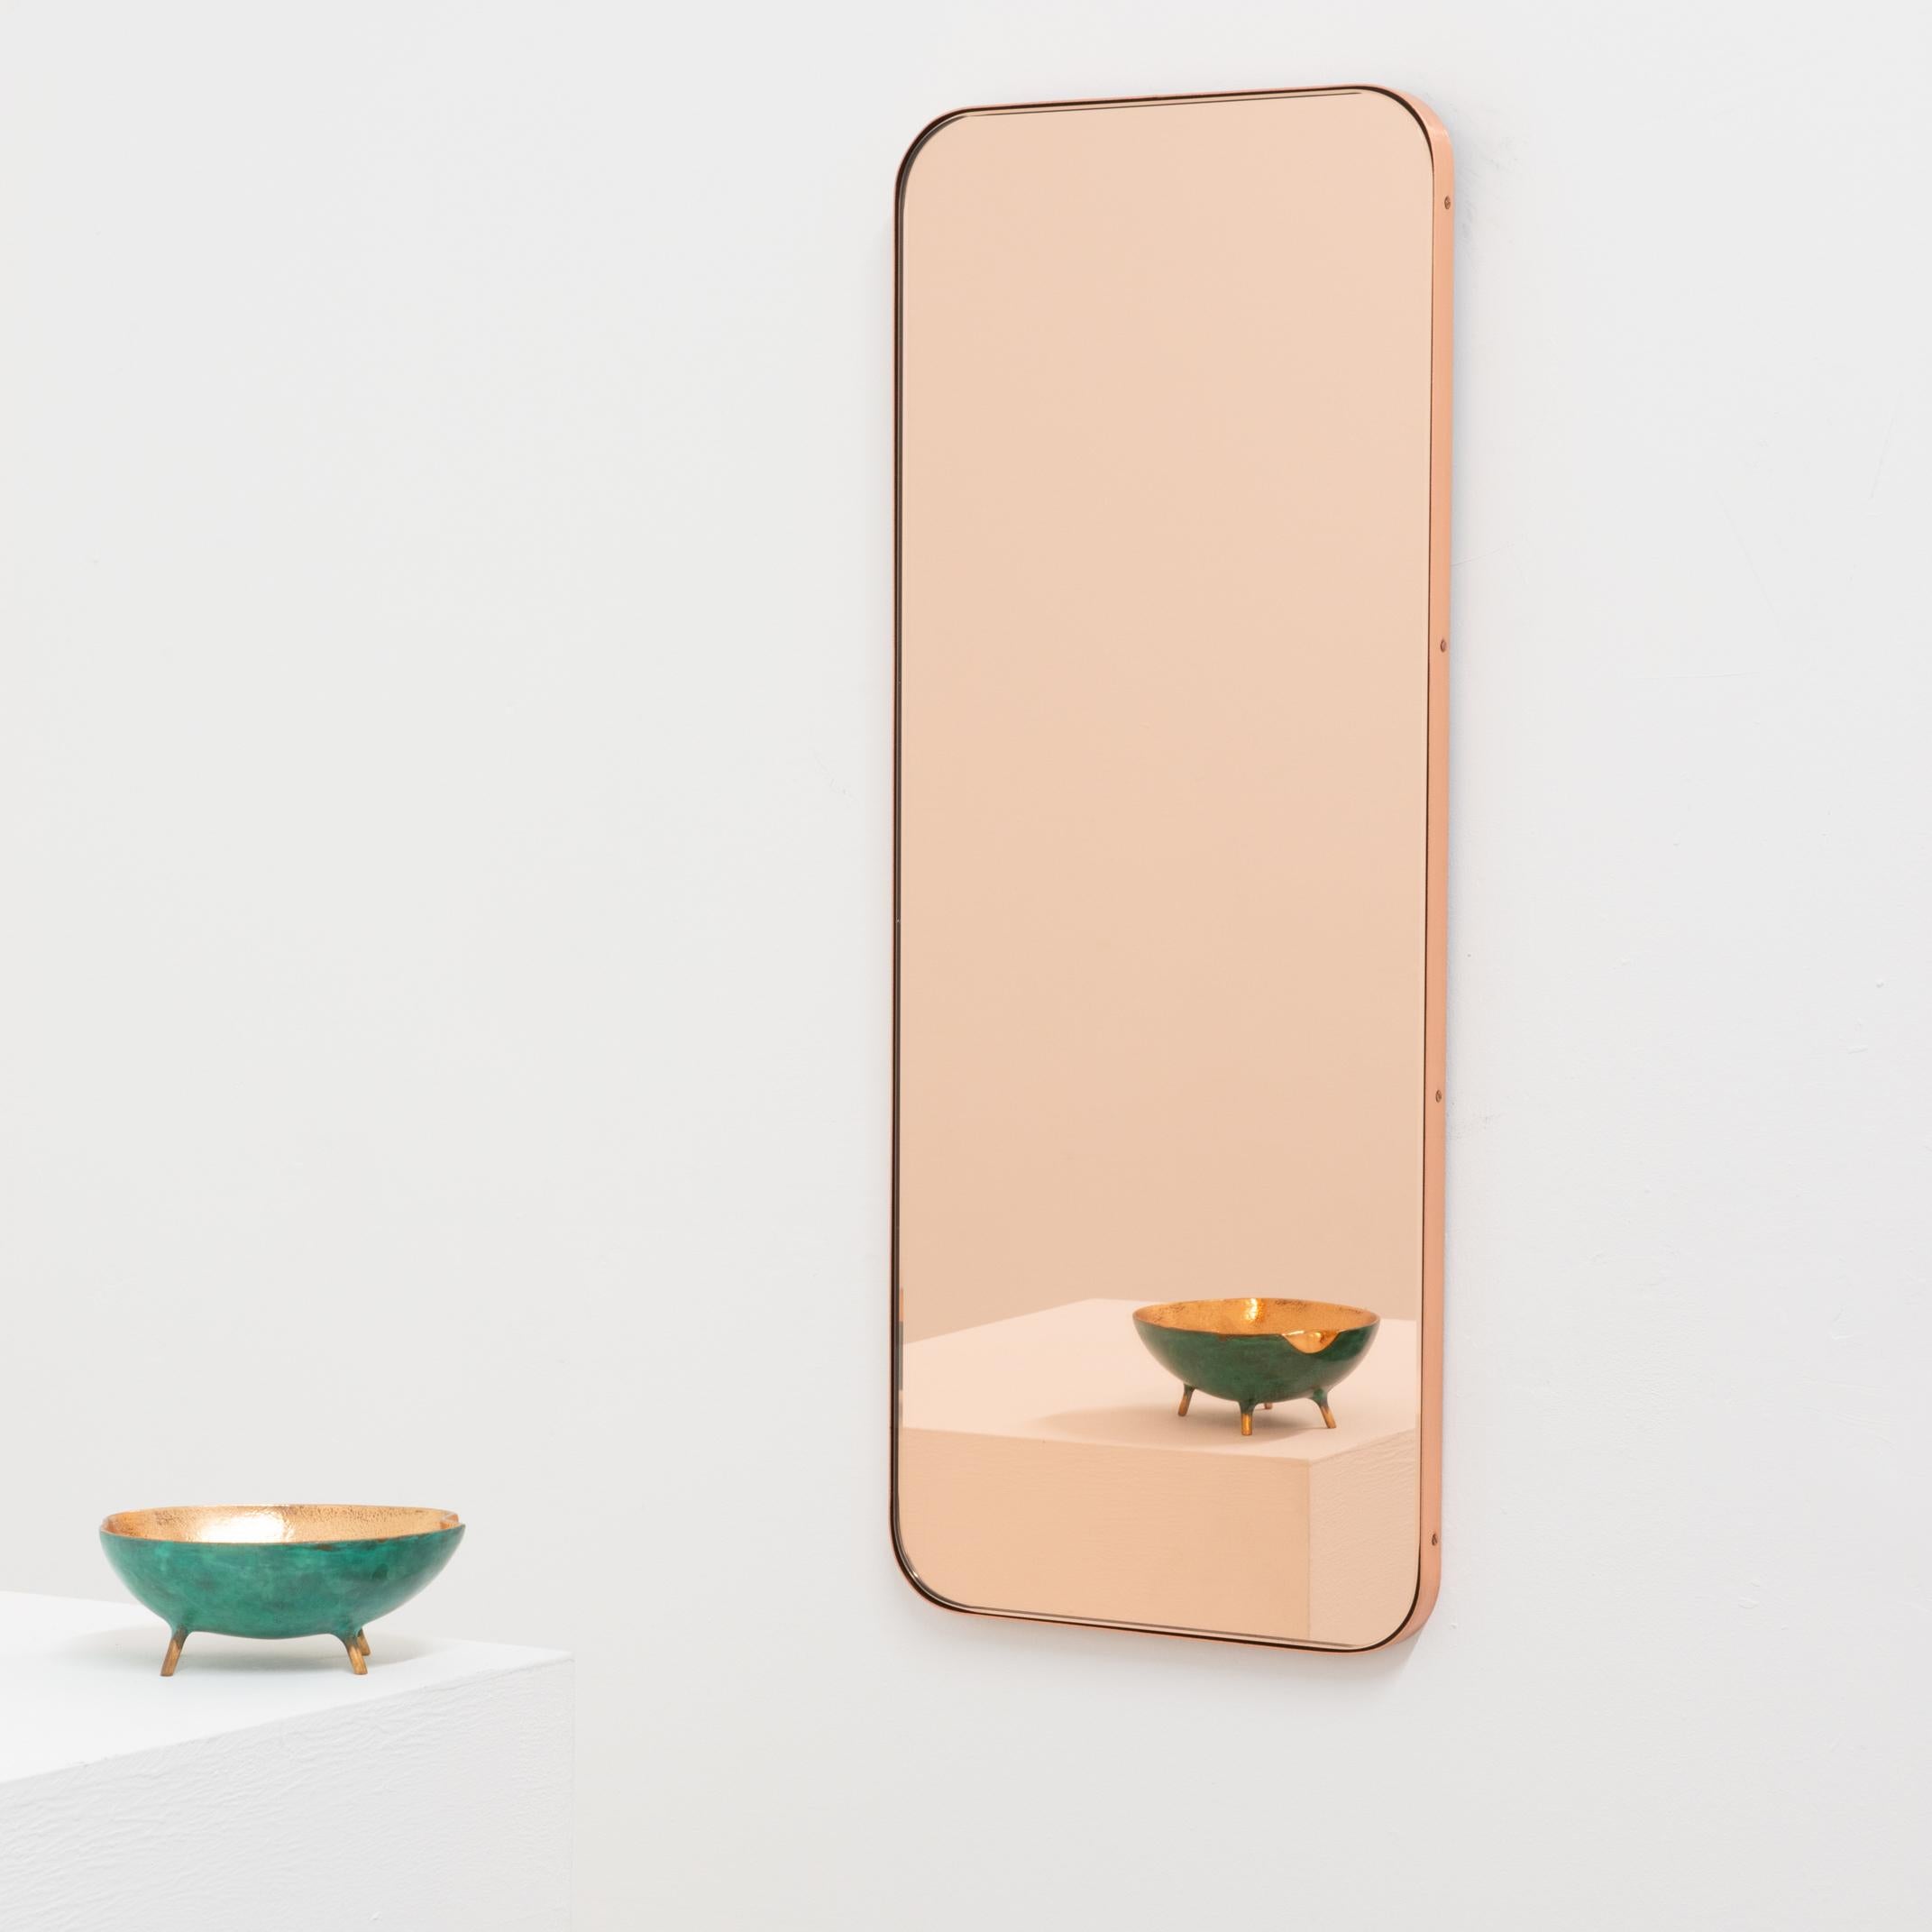 Minimalist rectangular mirror with an elegant slim brushed copper frame. The detailing and finish, including visible copper plated screws, emphasise the crafty and quality feel of the mirror, a true signature of our brand. Designed and handcrafted